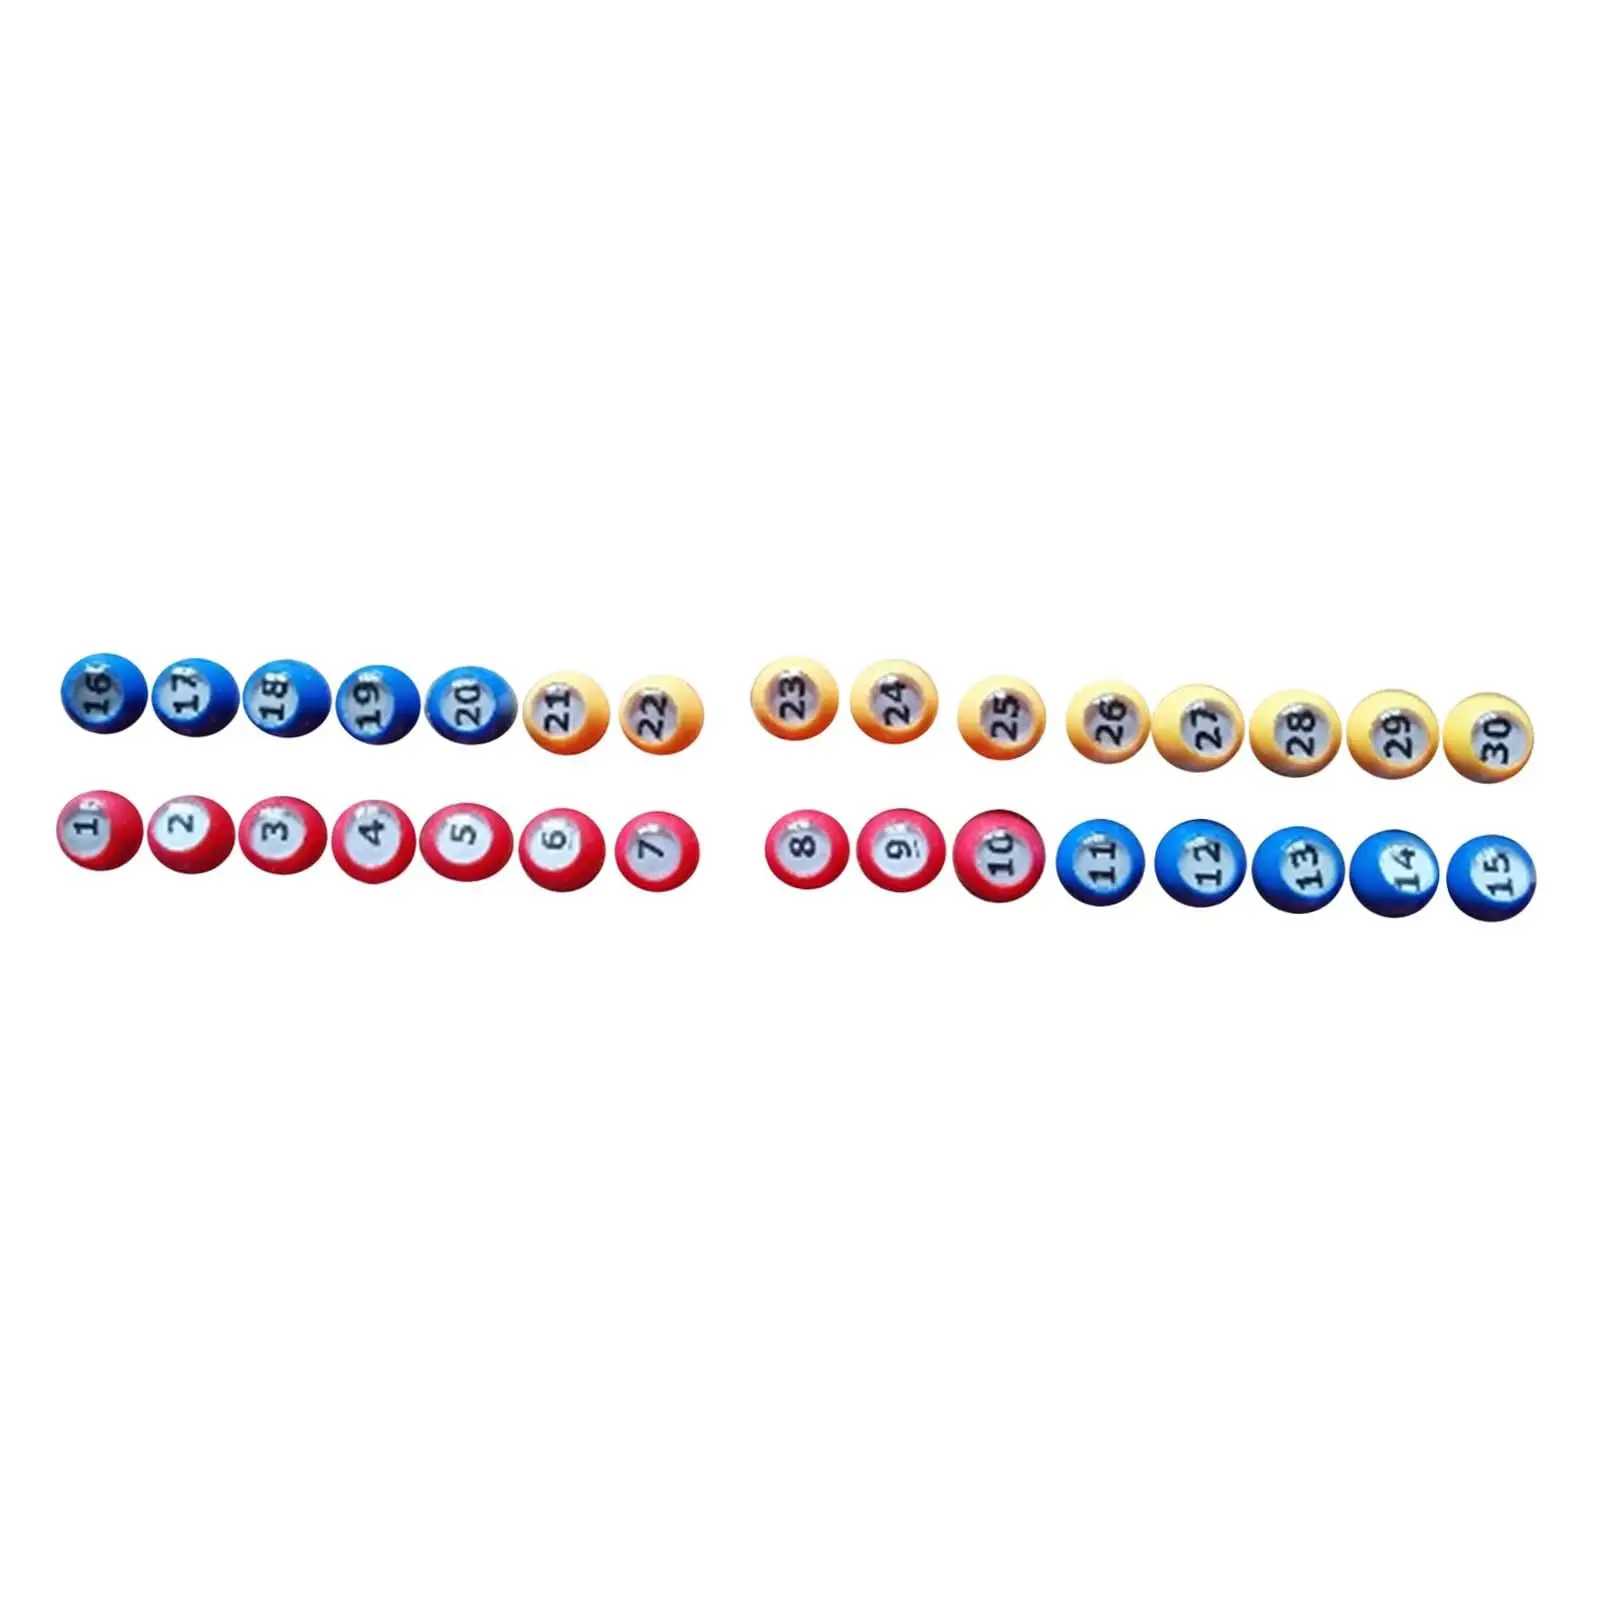 30x Bingo Ball Replacement Equipment with Easy Read Window Raffle Balls for Household Office Birthday Traveling Entertainment